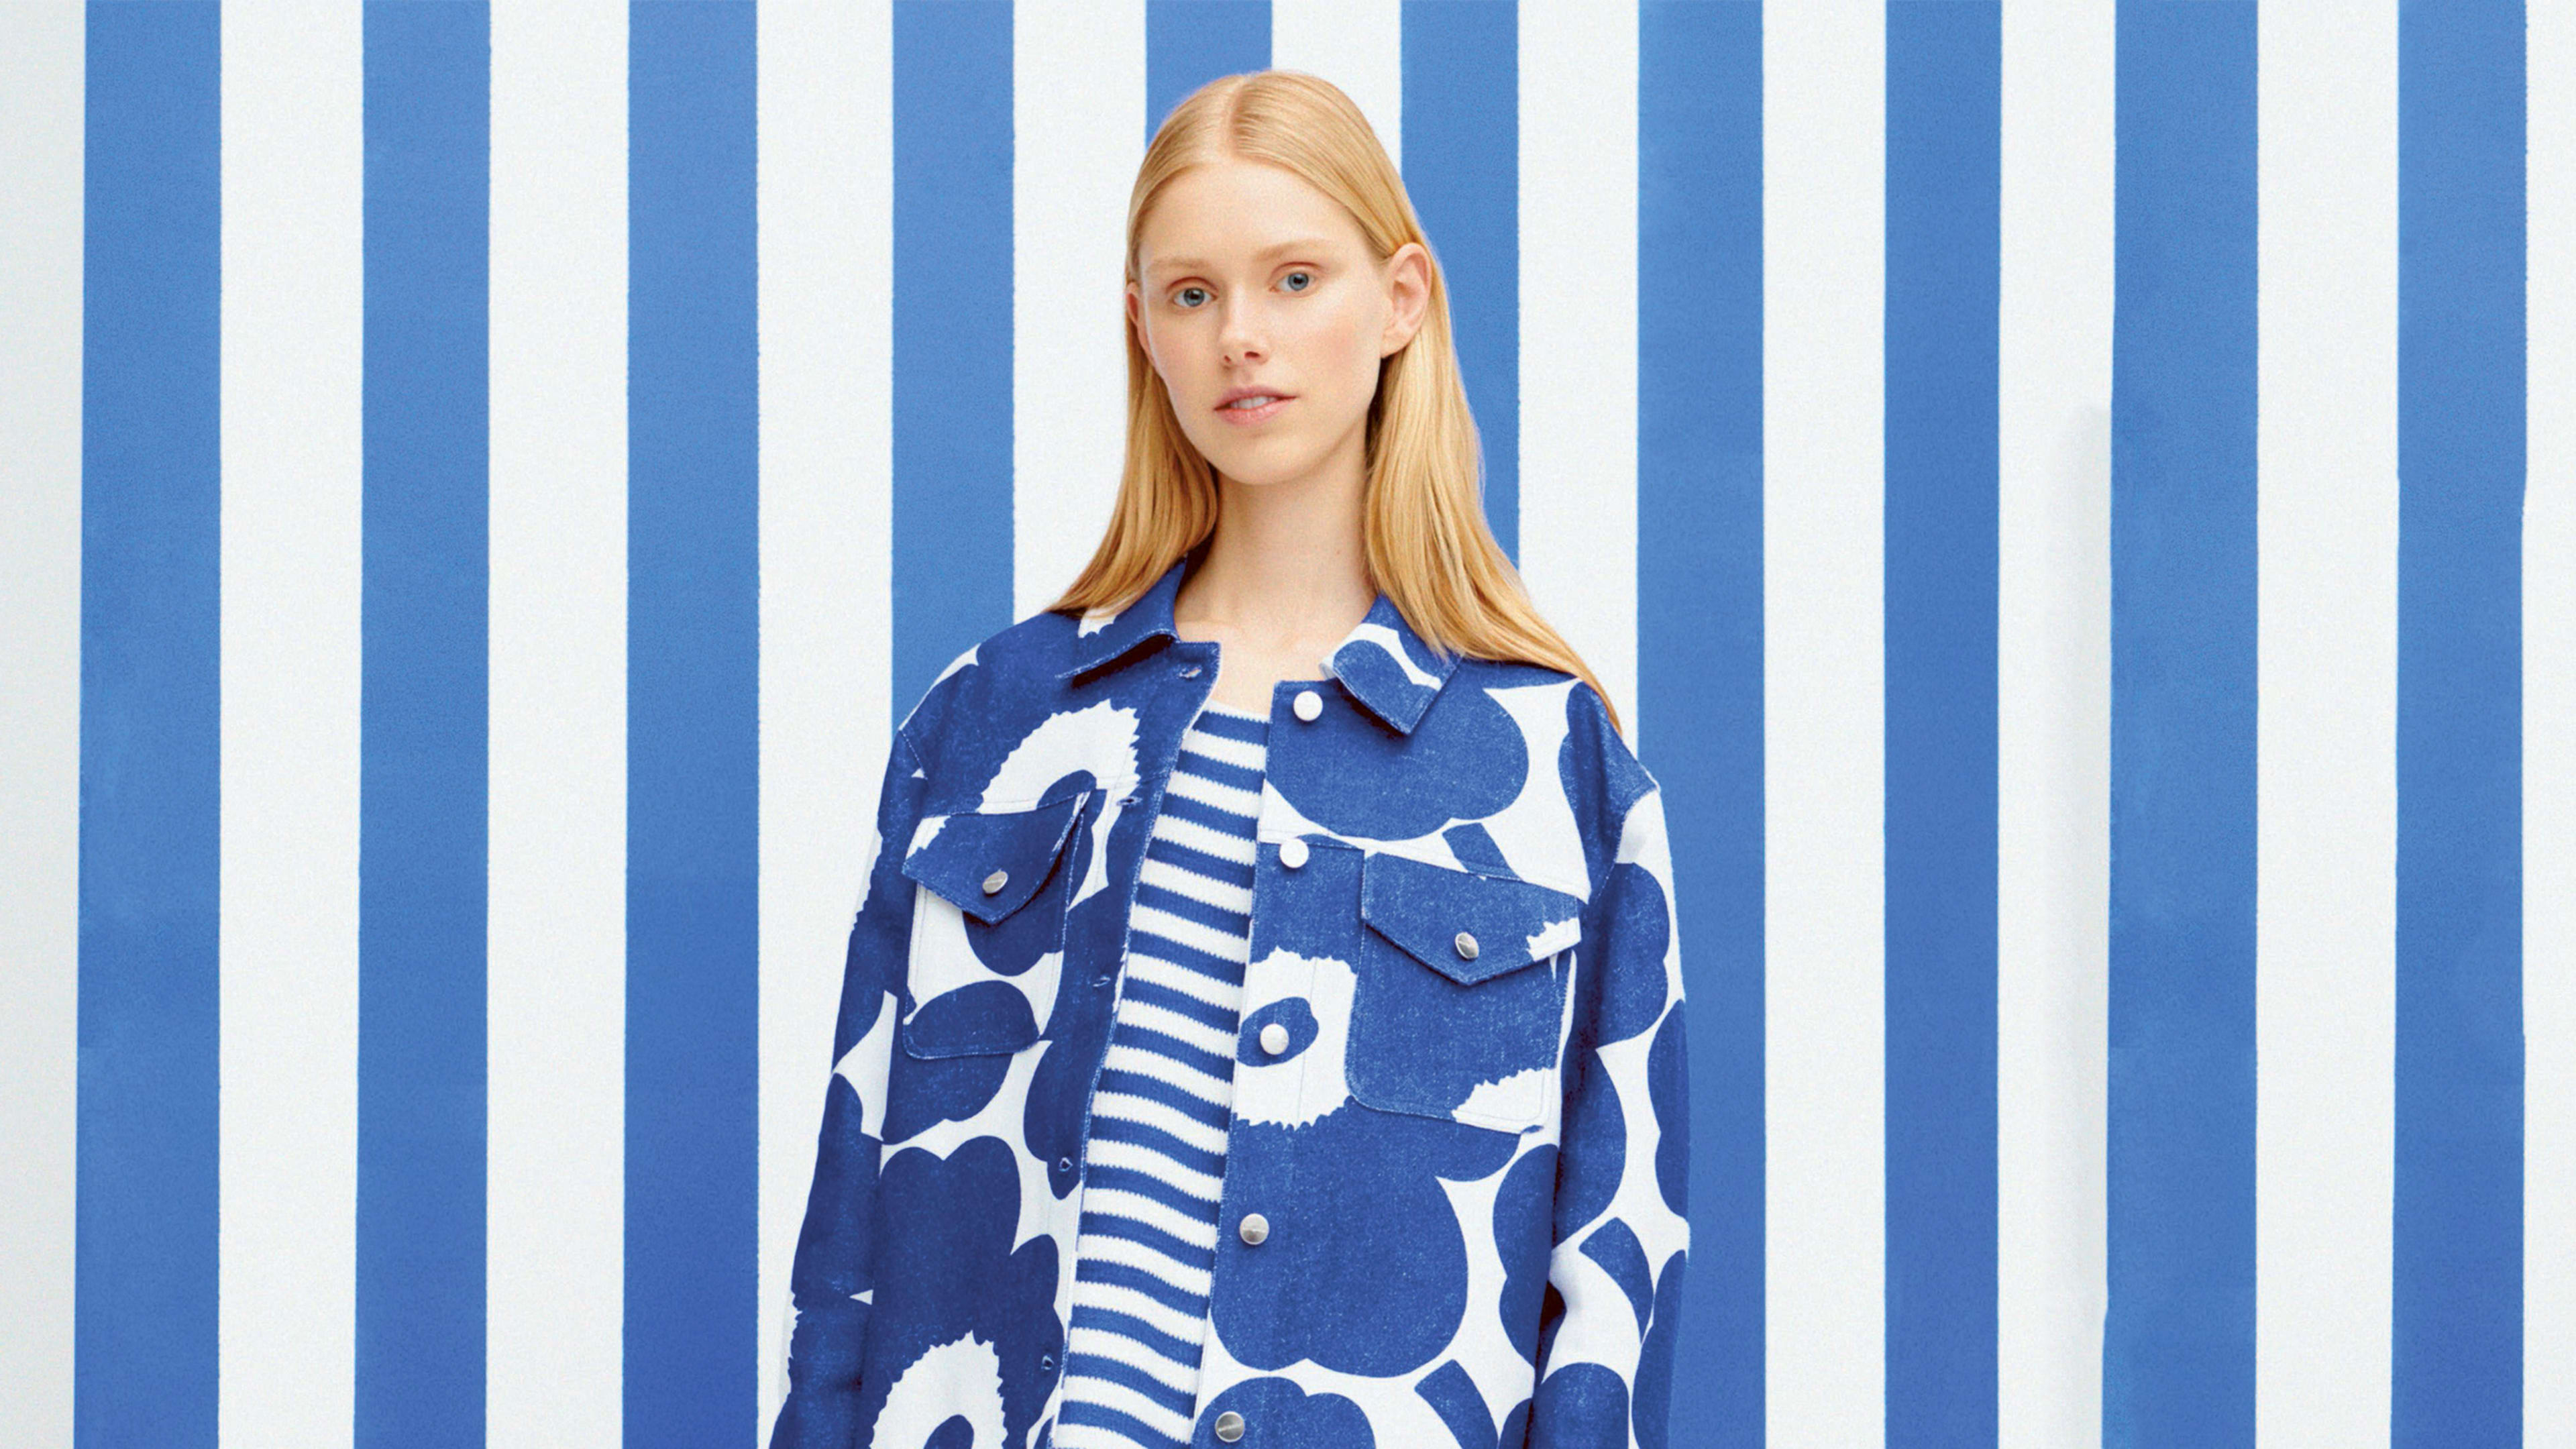 Marimekko’s iconic fabric will soon be made from wood pulp